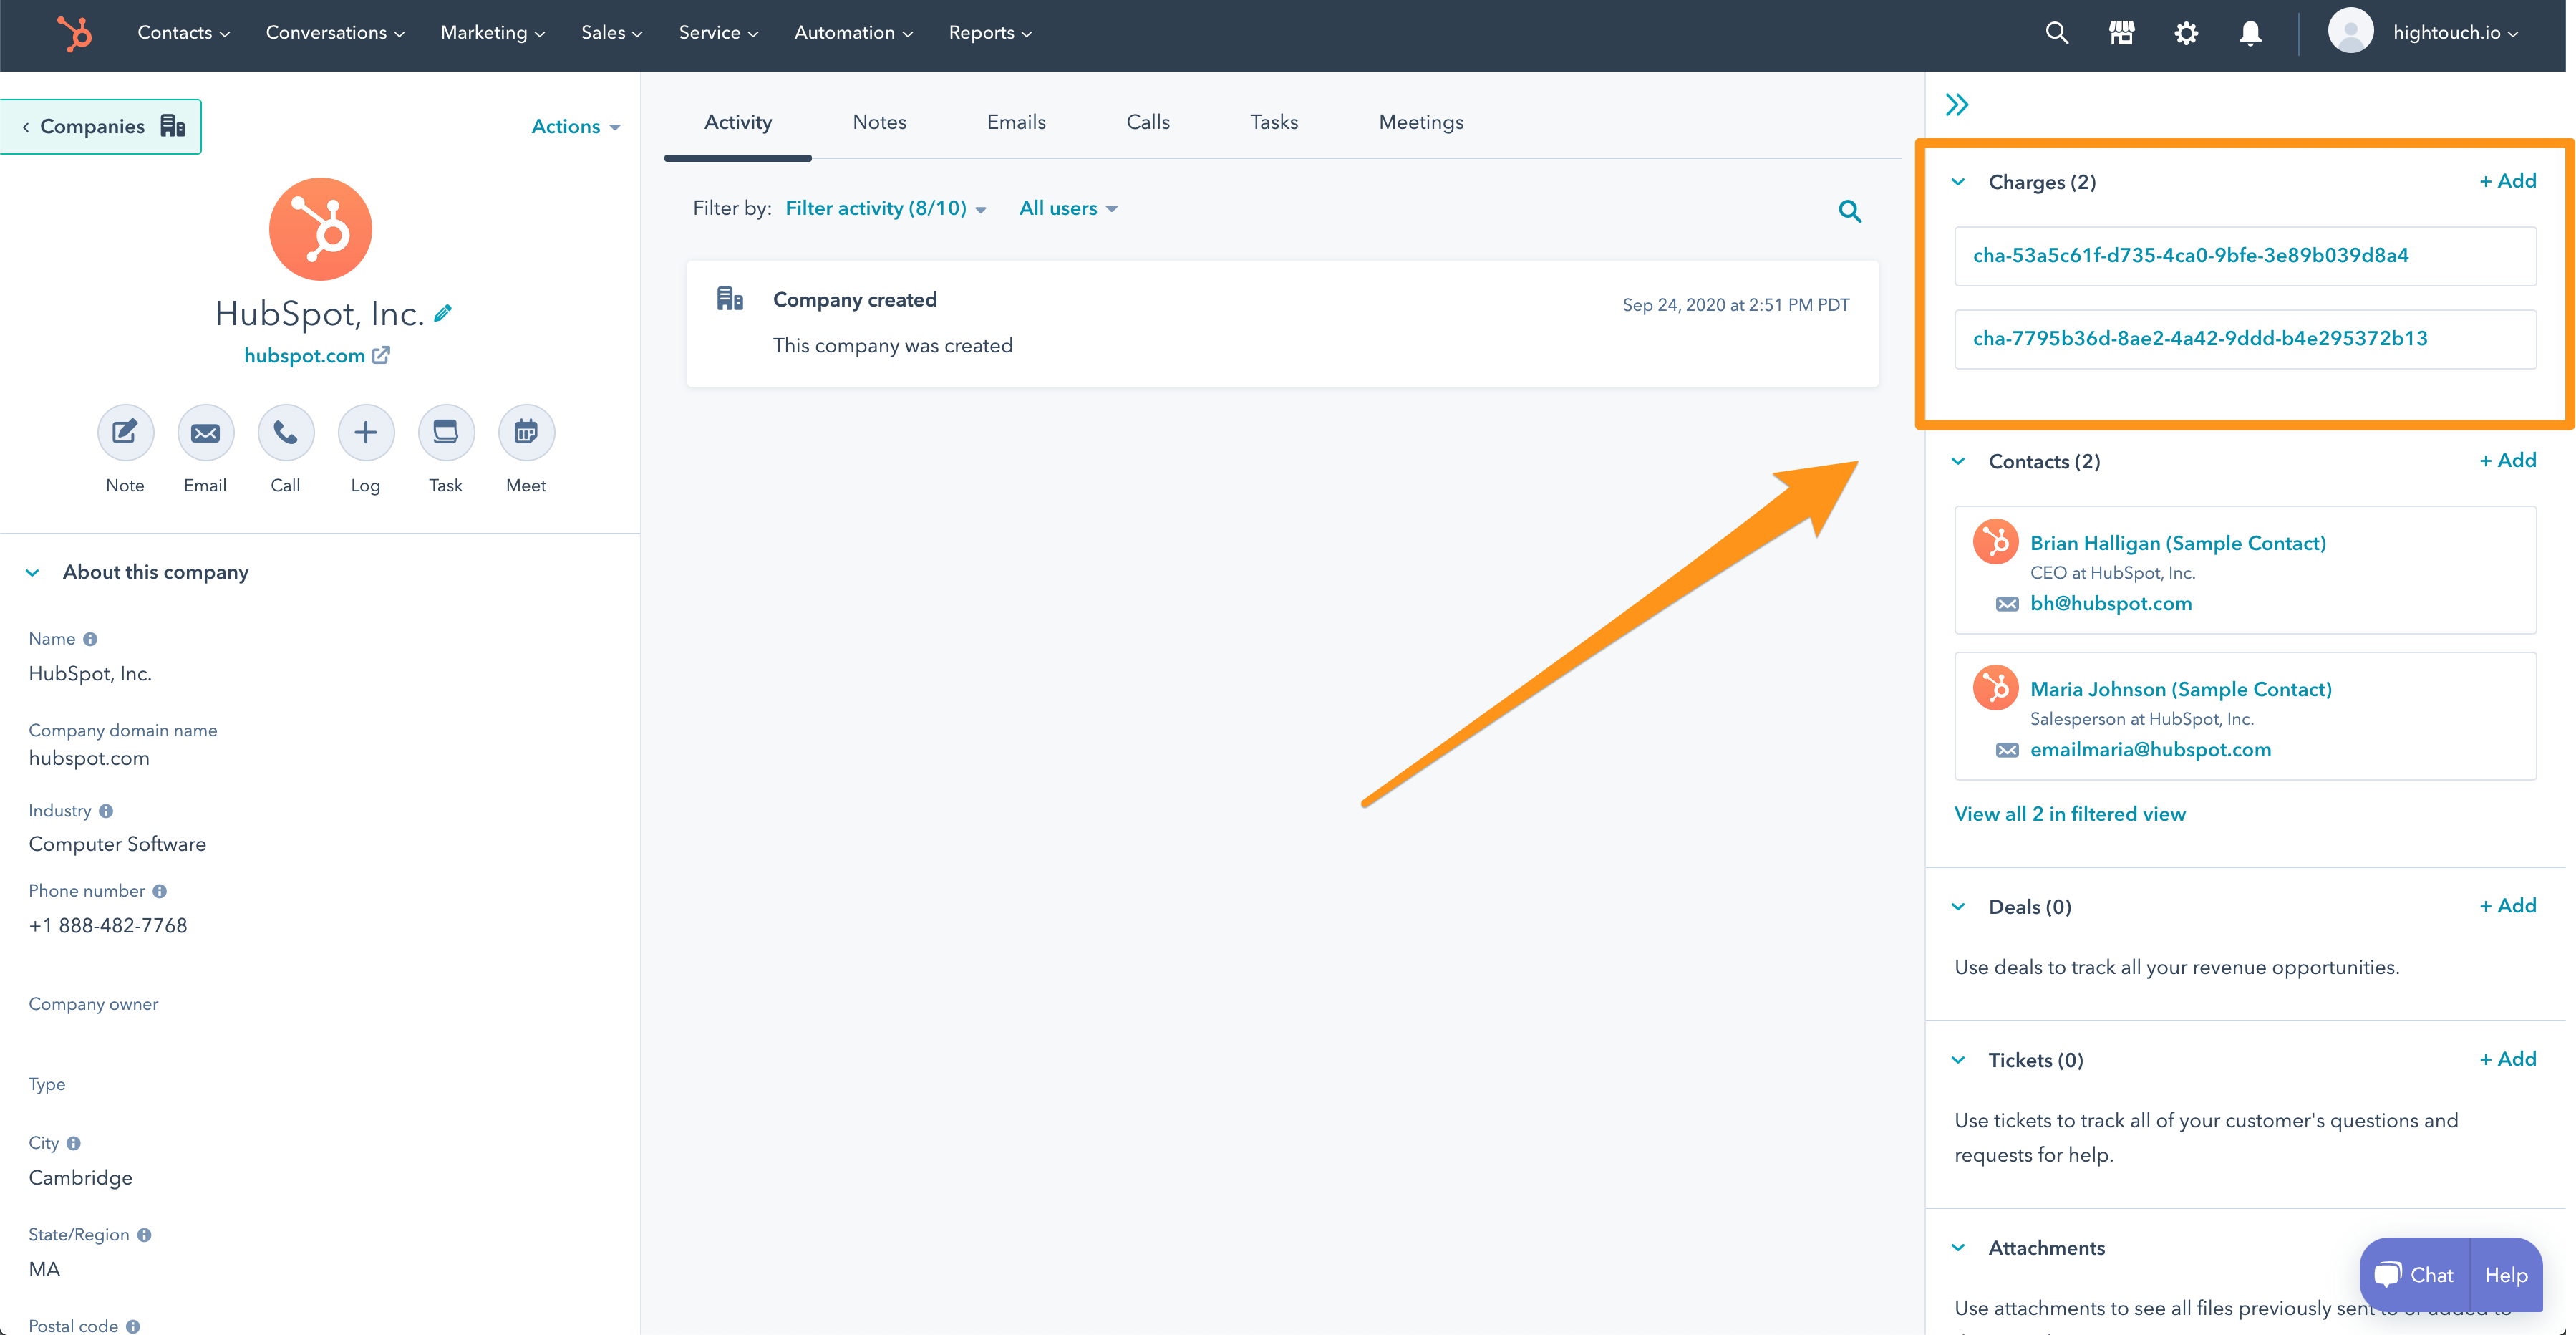 how-to-sync-custom-objects-and-fields-from-your-data-warehouse-to-hubspot 2.png